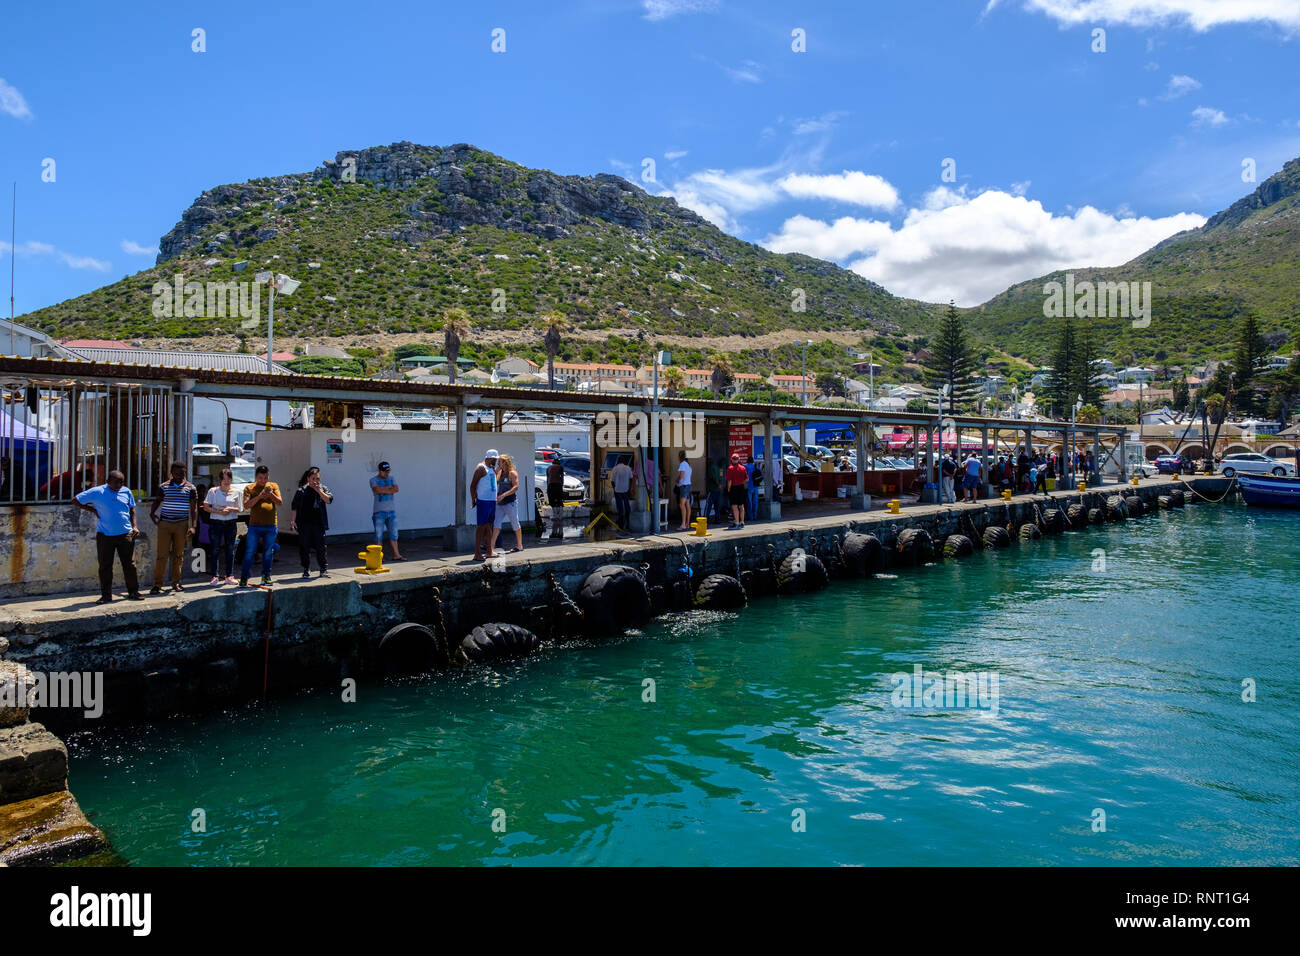 Tourists watching seals in Kalk Bay Harbour, near Cape Town, South Africa Stock Photo